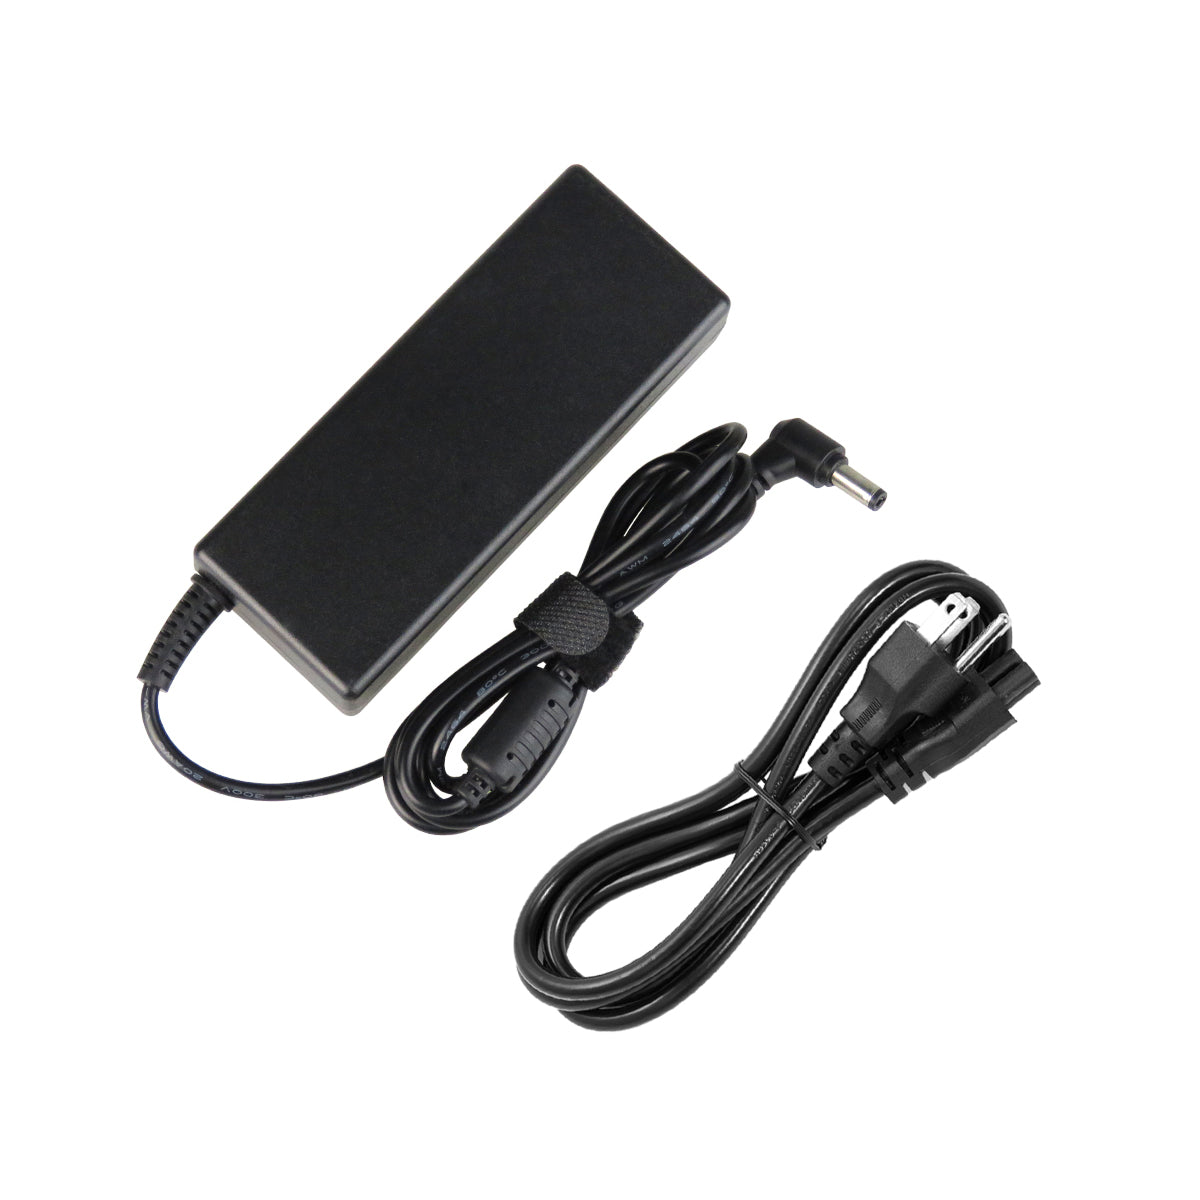 AC Adapter Charger for ASUS a53e Series Notebook.